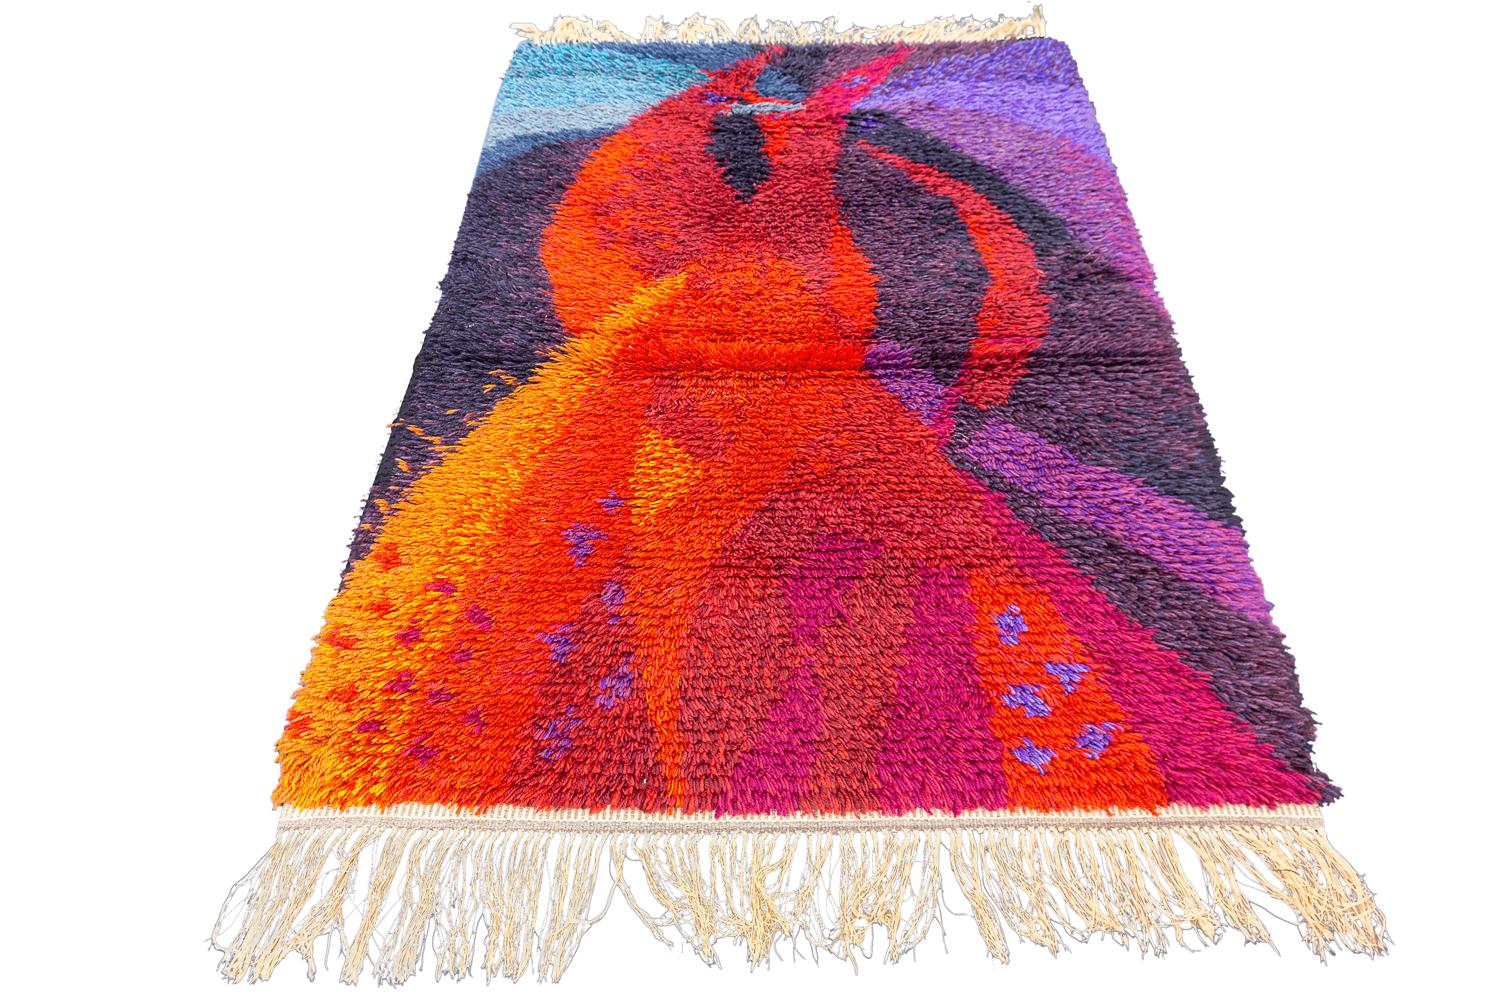 Hand-Knotted Swedish Rya Wool Rug Vintage Signed E.F.G.3, 1950-1970 For Sale